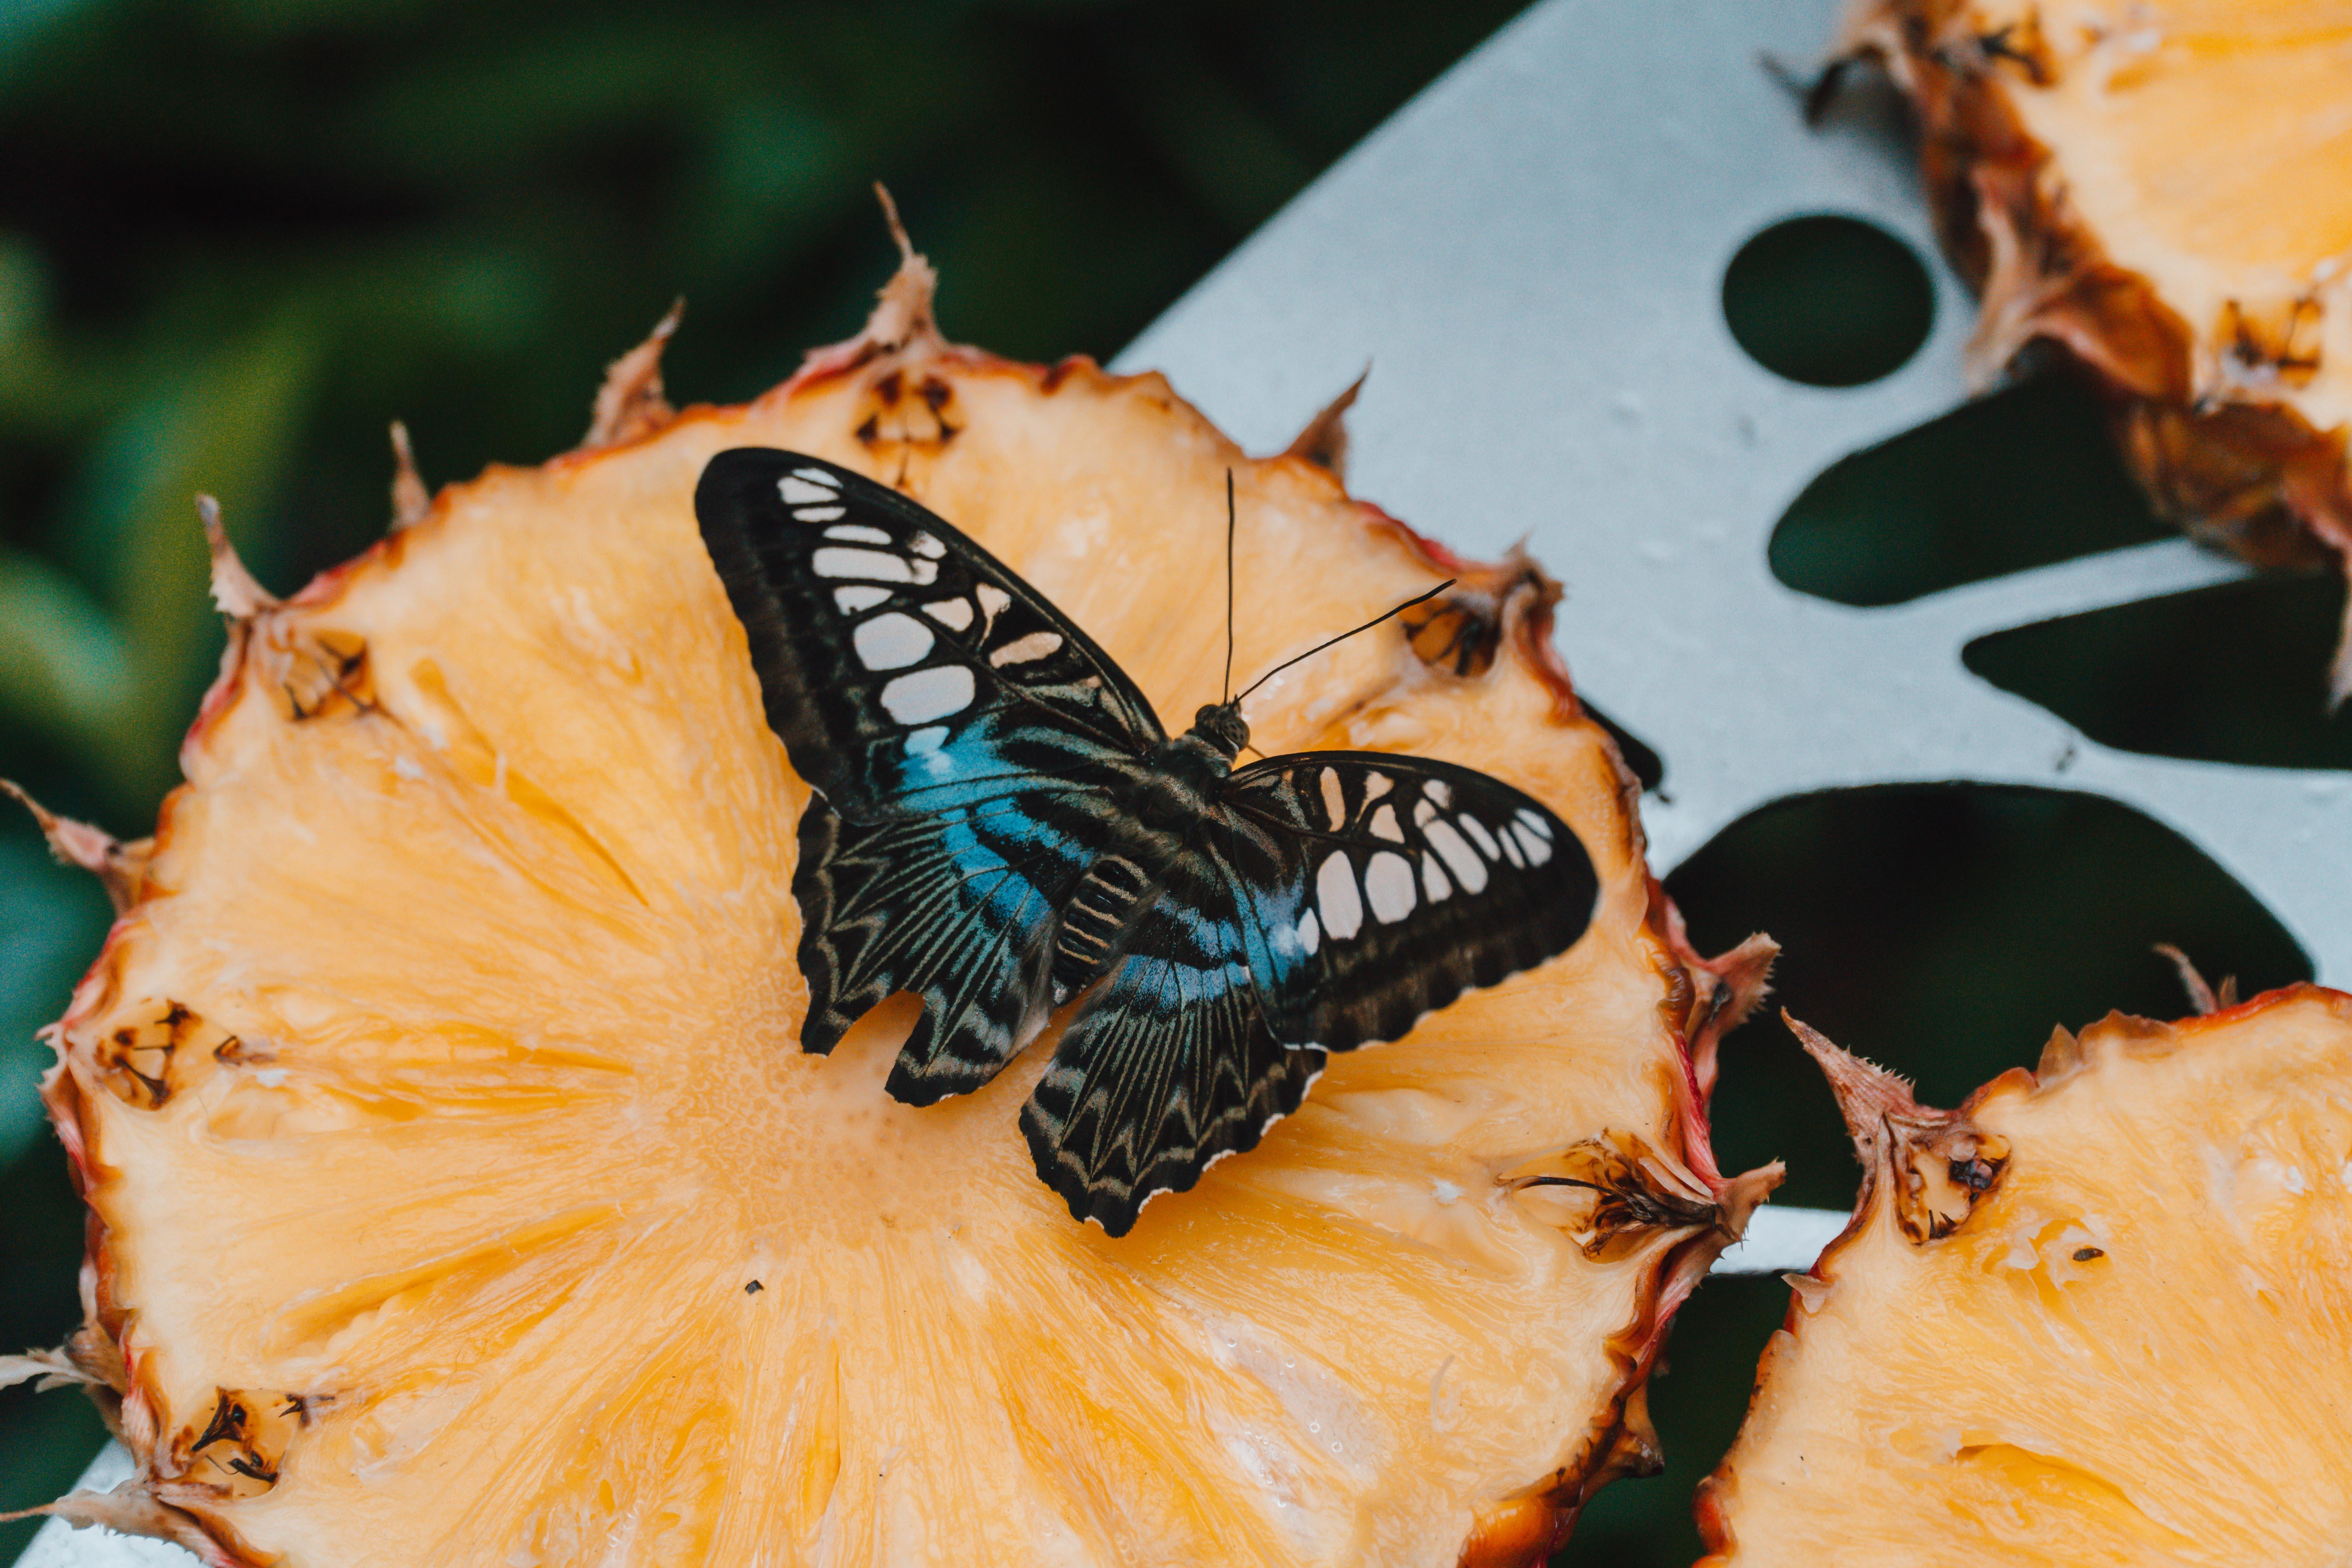 A blue and black coloured butterfly on a slice of a pineapple.